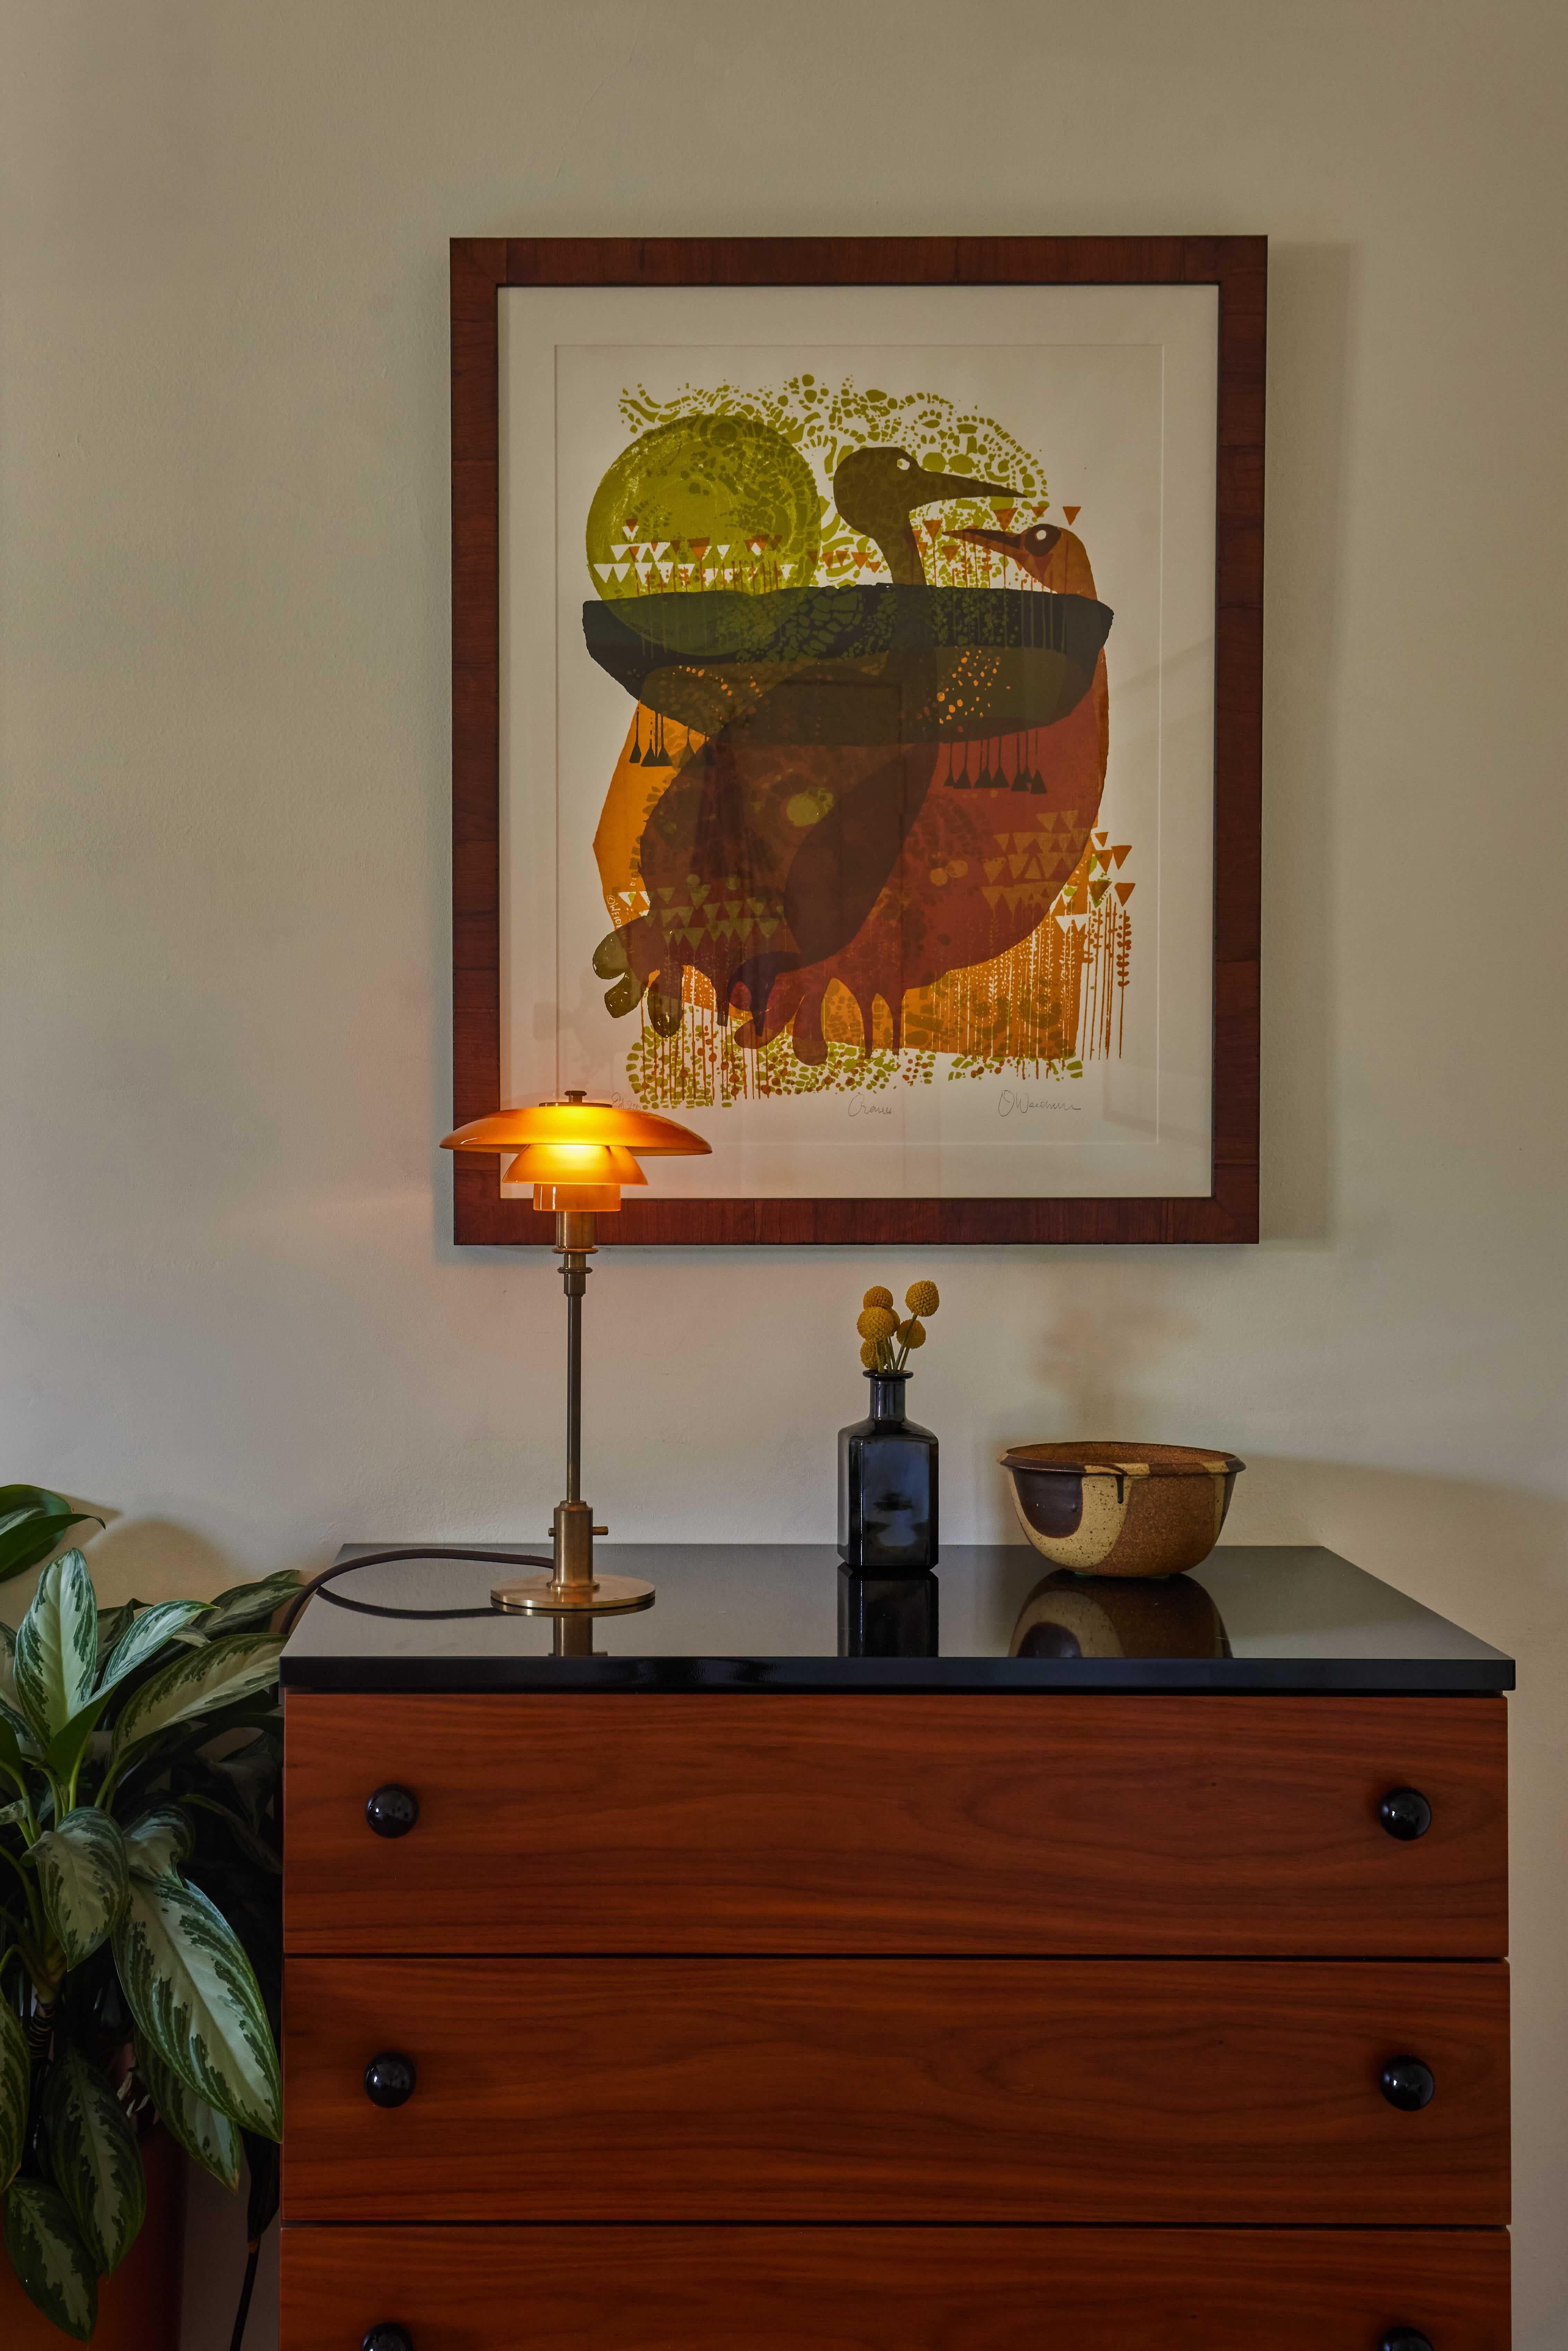 Poul Henningsen Limited Edition PH 2/1 Amber Glass Table Lamp for Louis Poulsen.

This legendary design stems from Henningsen's brilliant three-shade system from late 1920s. This limited edition 2020 version features opaline amber glass shades and